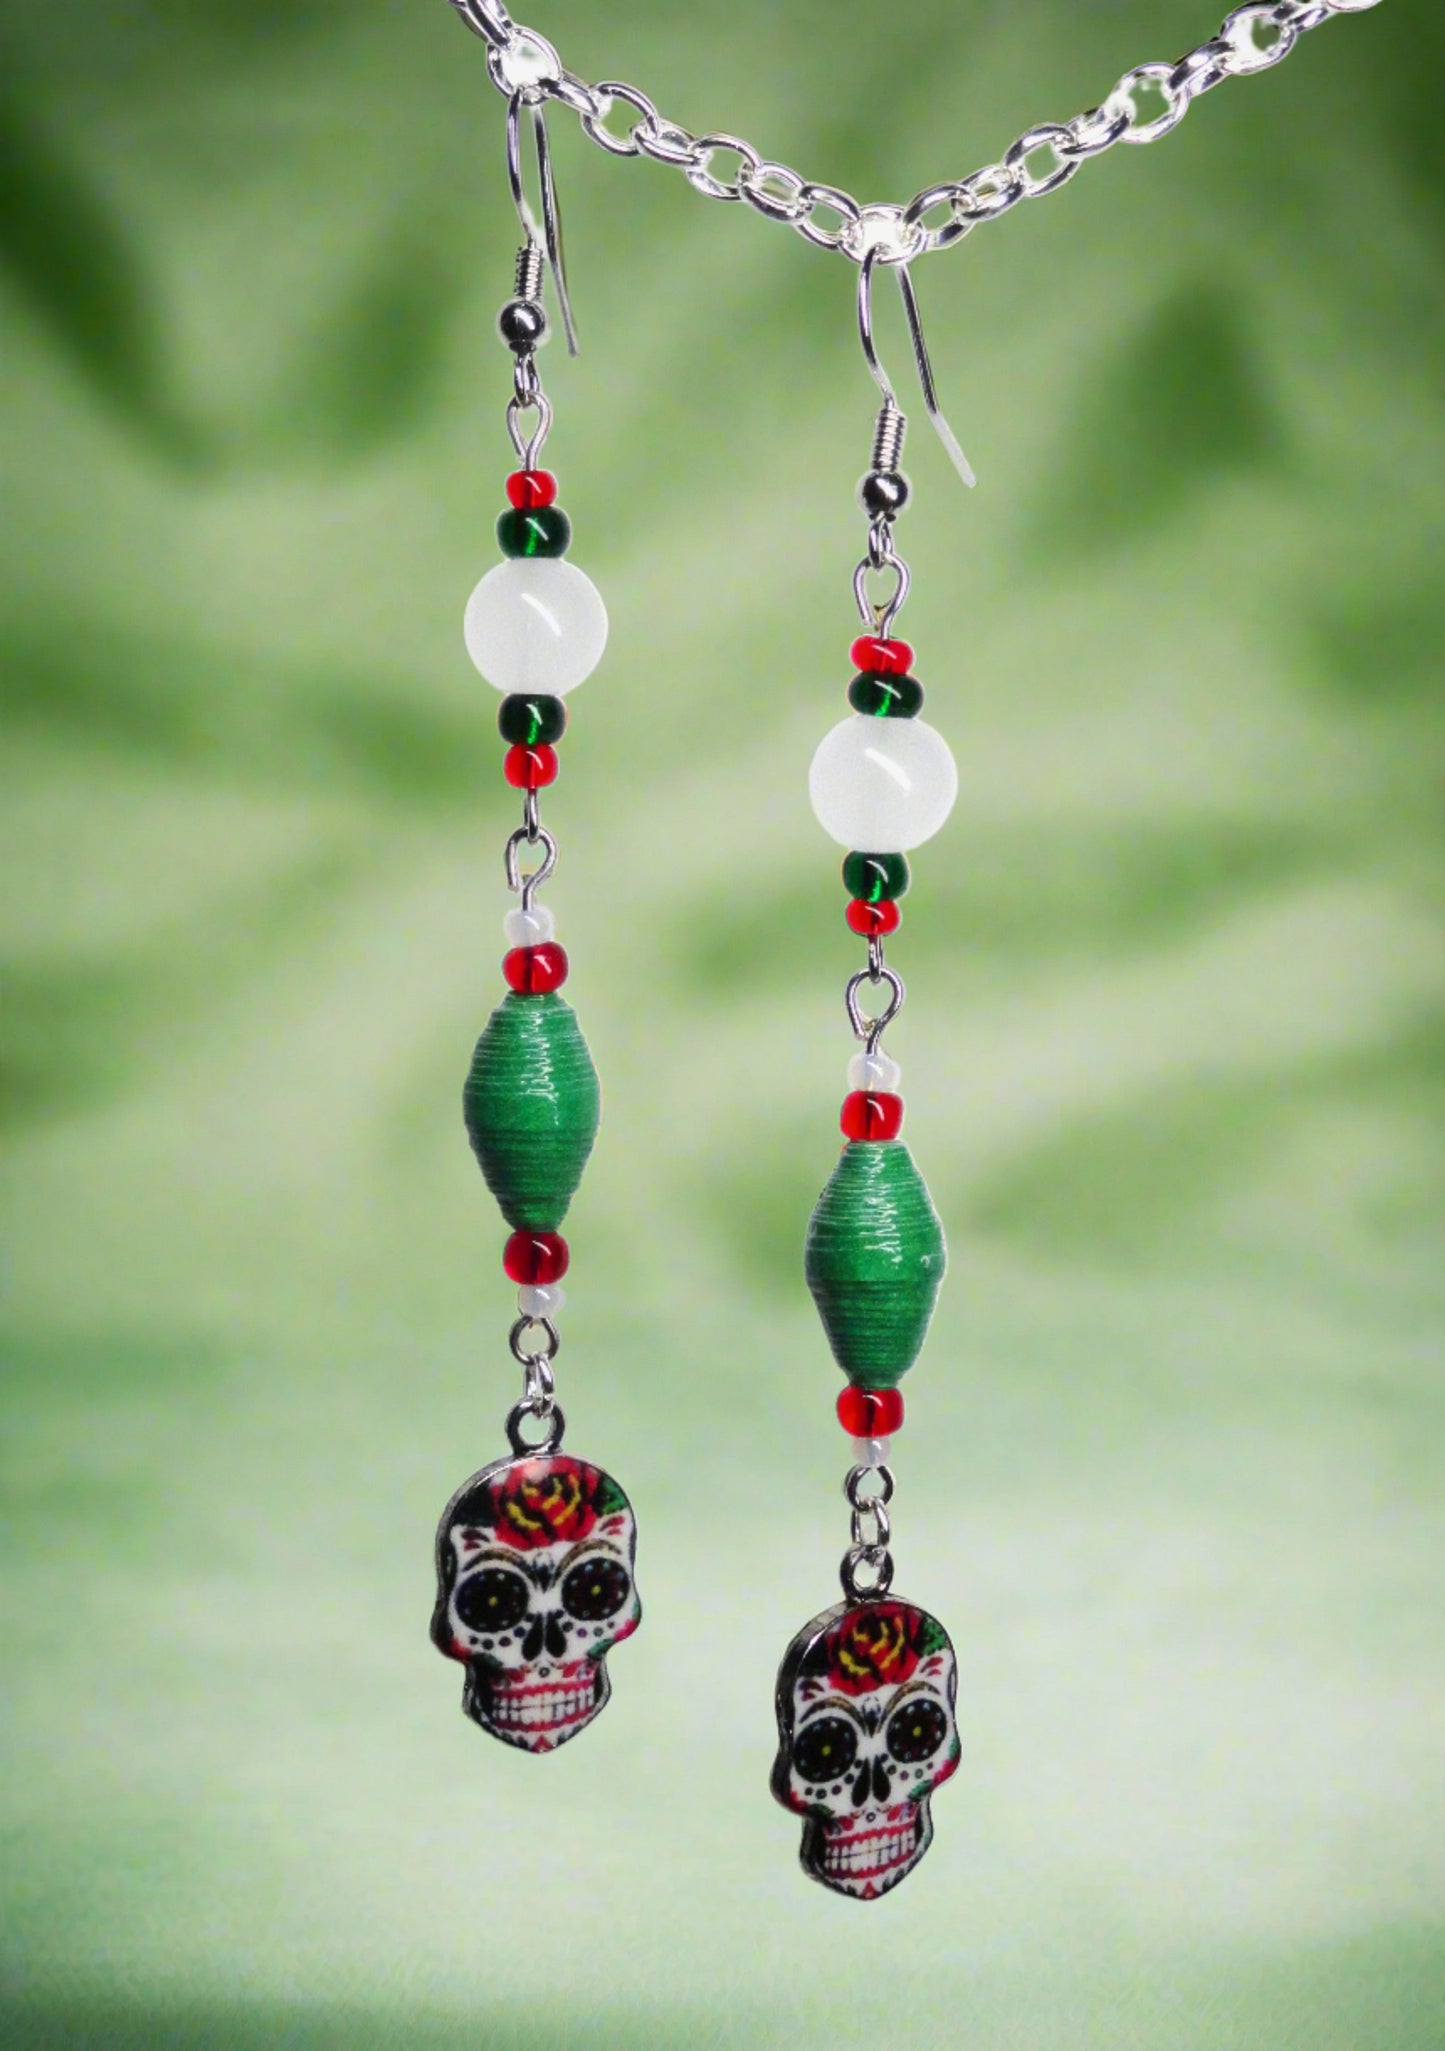 Sugar Skull Earrings With Multicolored Handmade Paper Beads and Glass Beads